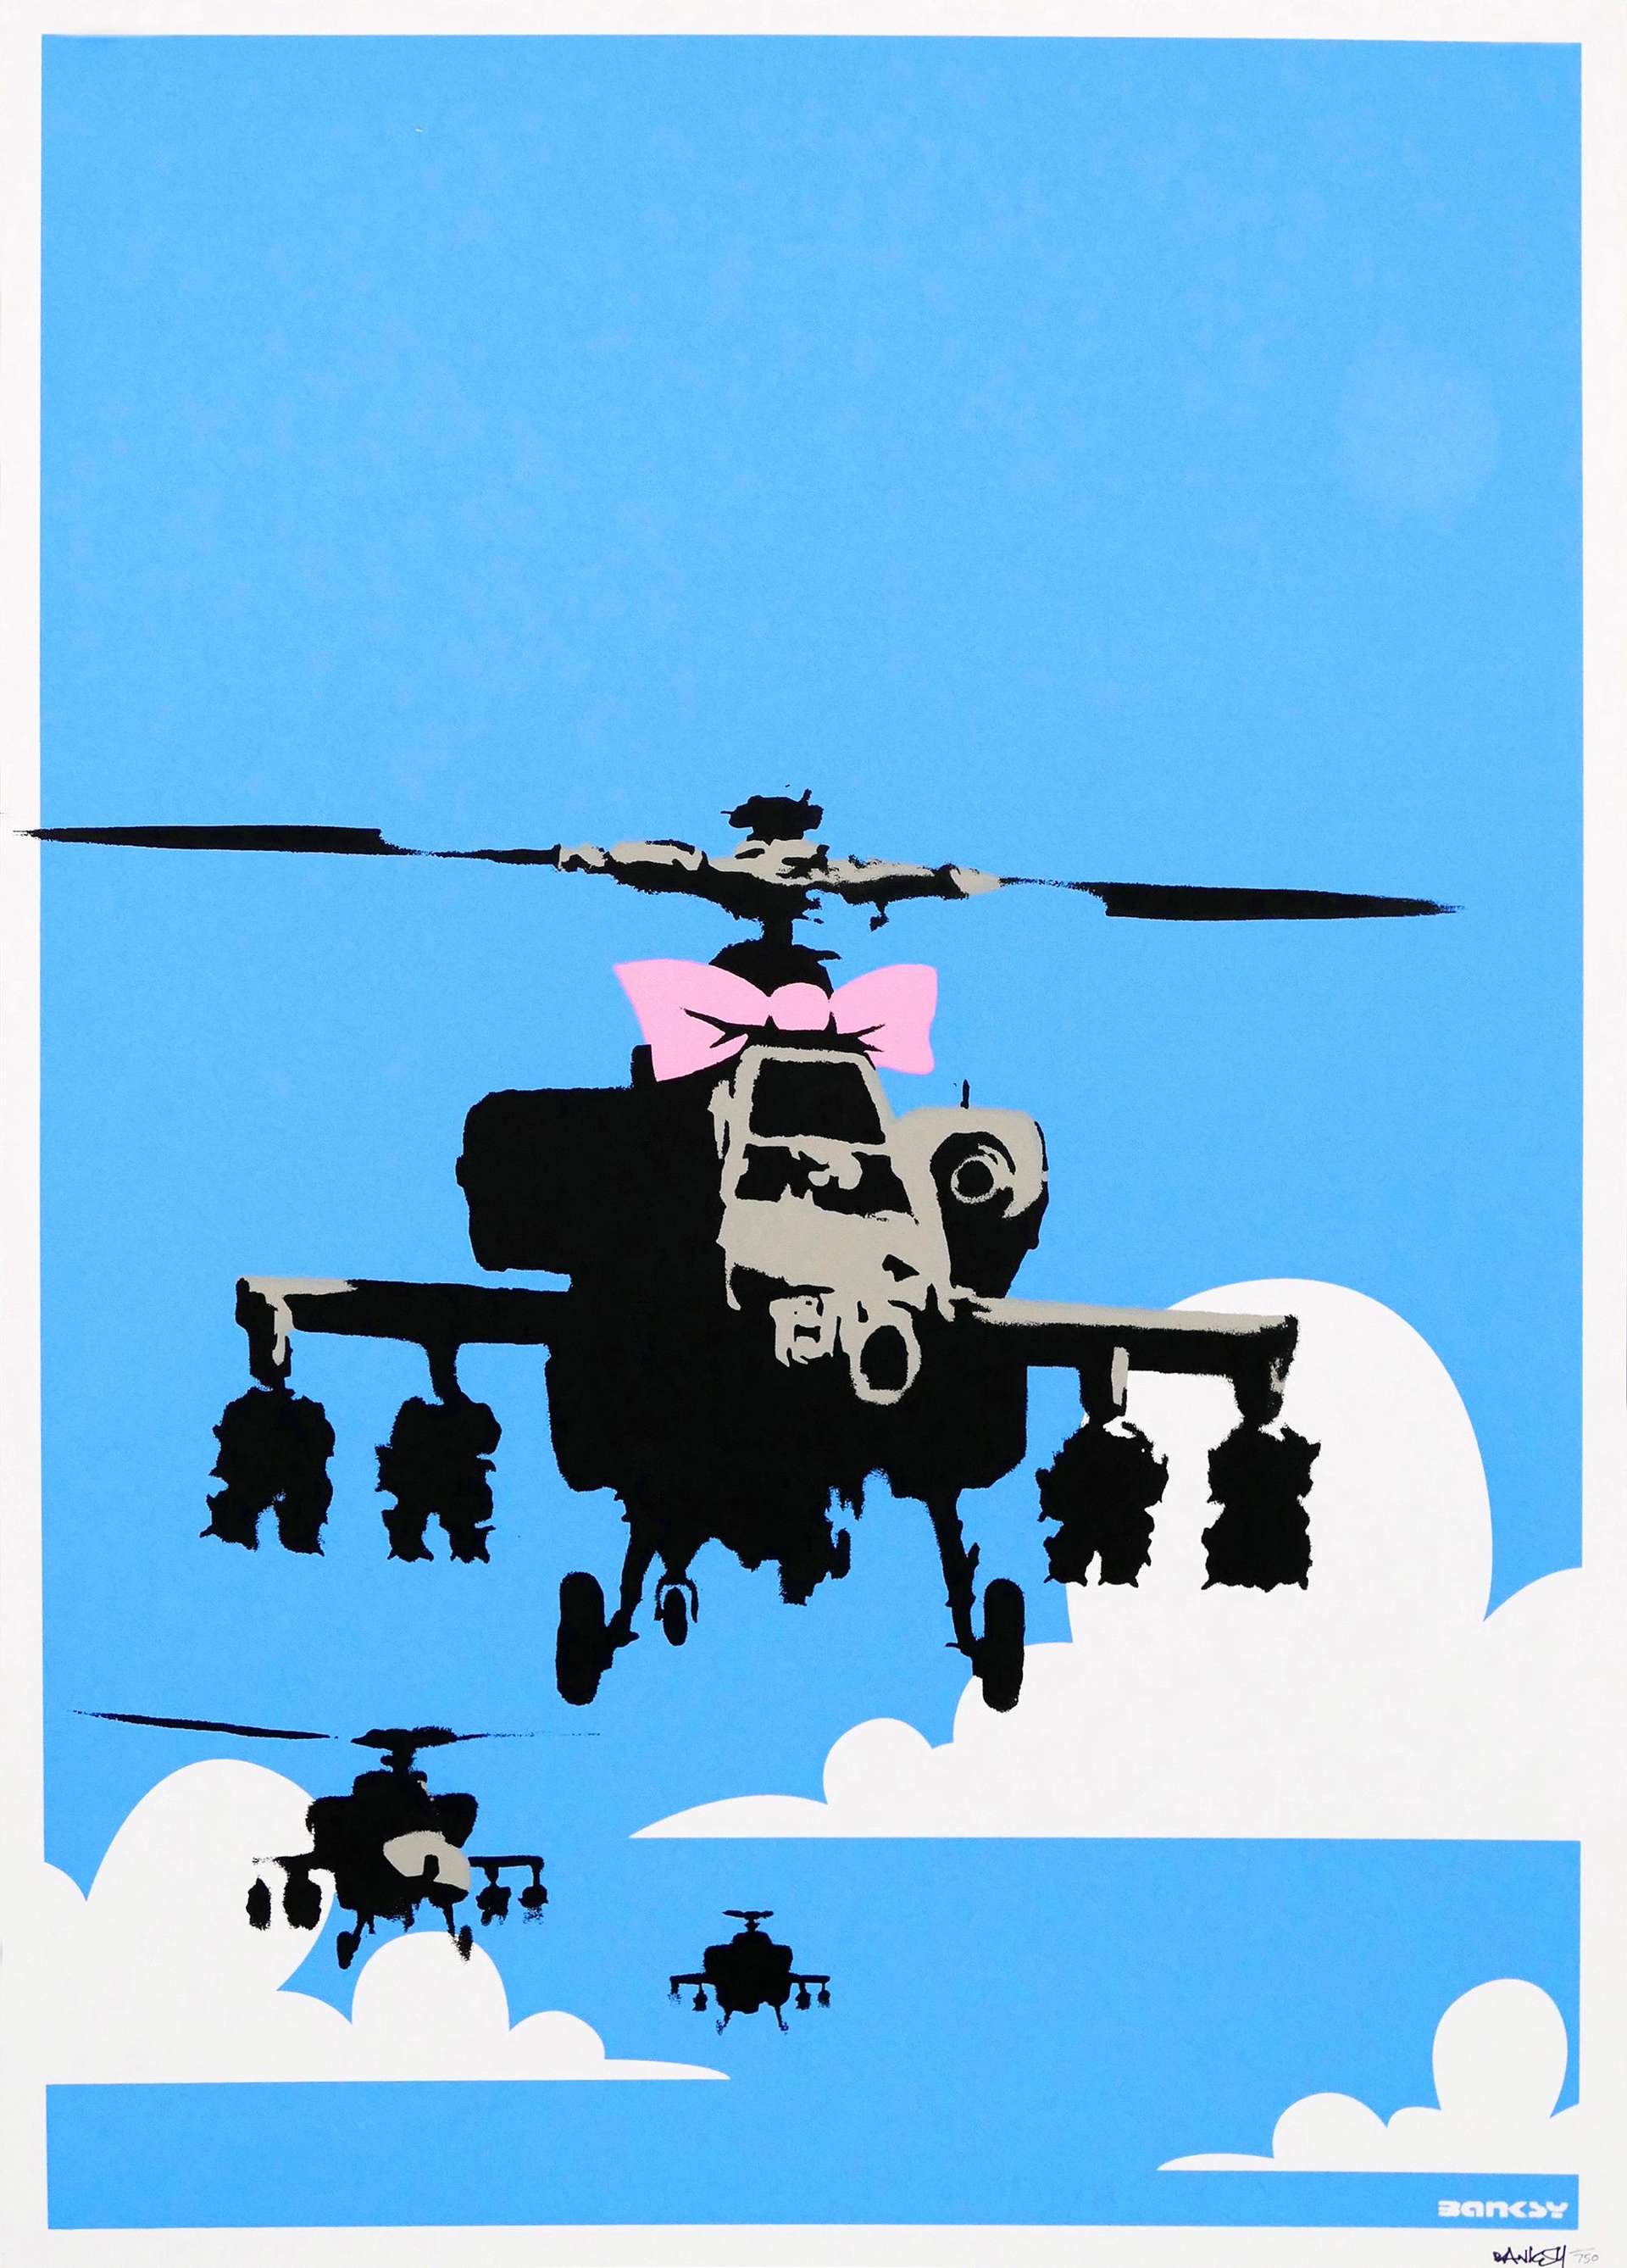 An image of the print Happy Choppers by Banksy. Three military-grade helicopters, depicted against a bright blue sky with few white clouds. The leading helicopter, closest to the viewer, is adorned with a big pink bow.